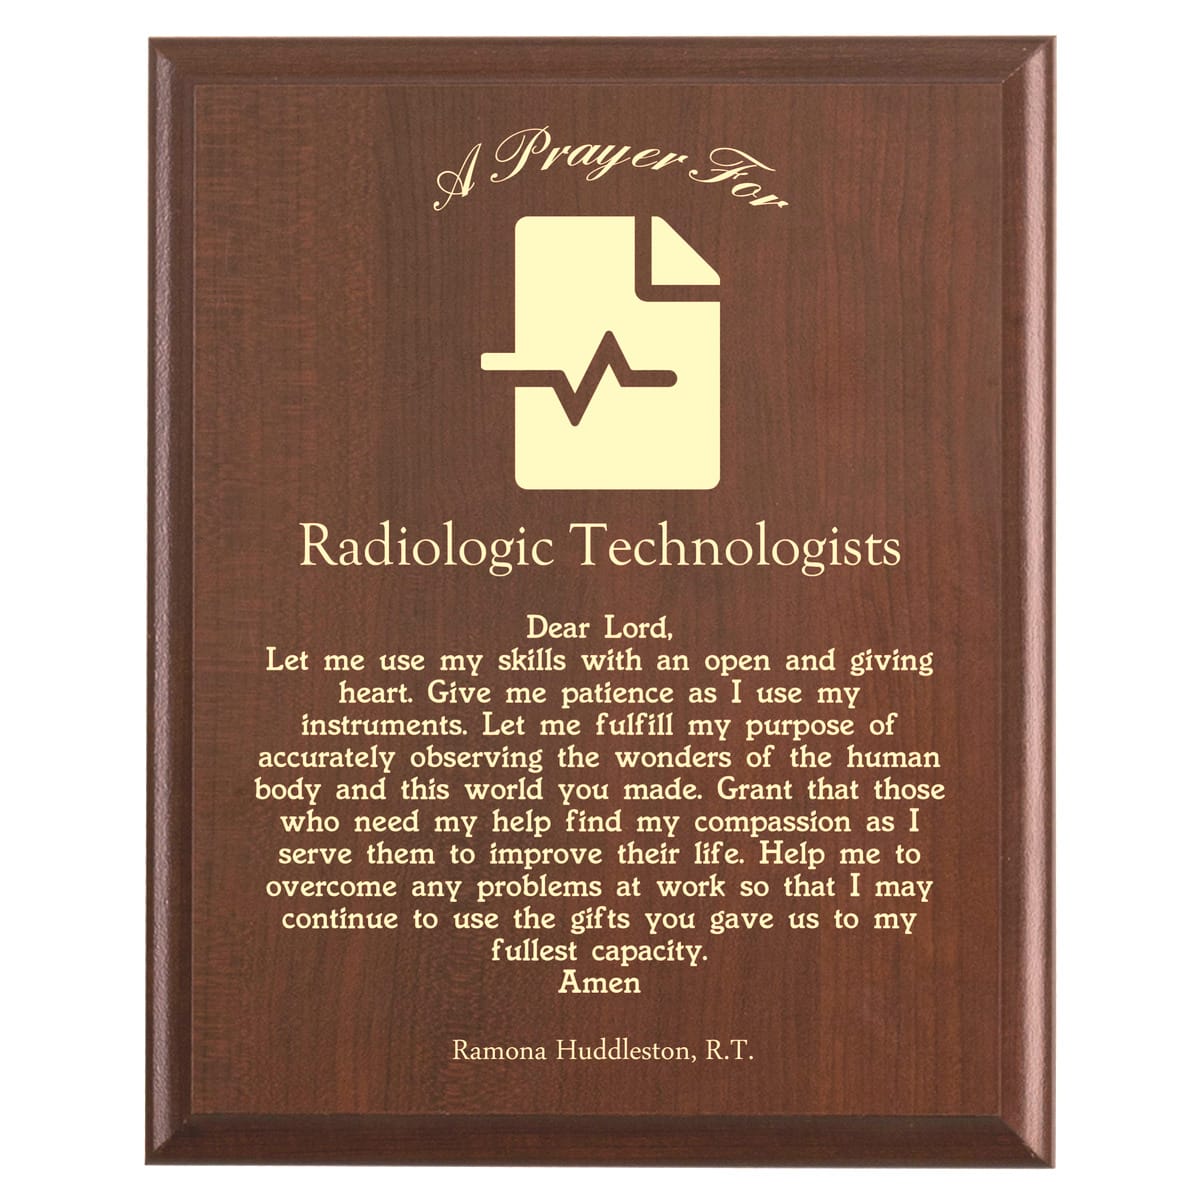 Plaque photo: Radiologic Technologist Prayer Plaque design with free personalization. Wood style finish with customized text.